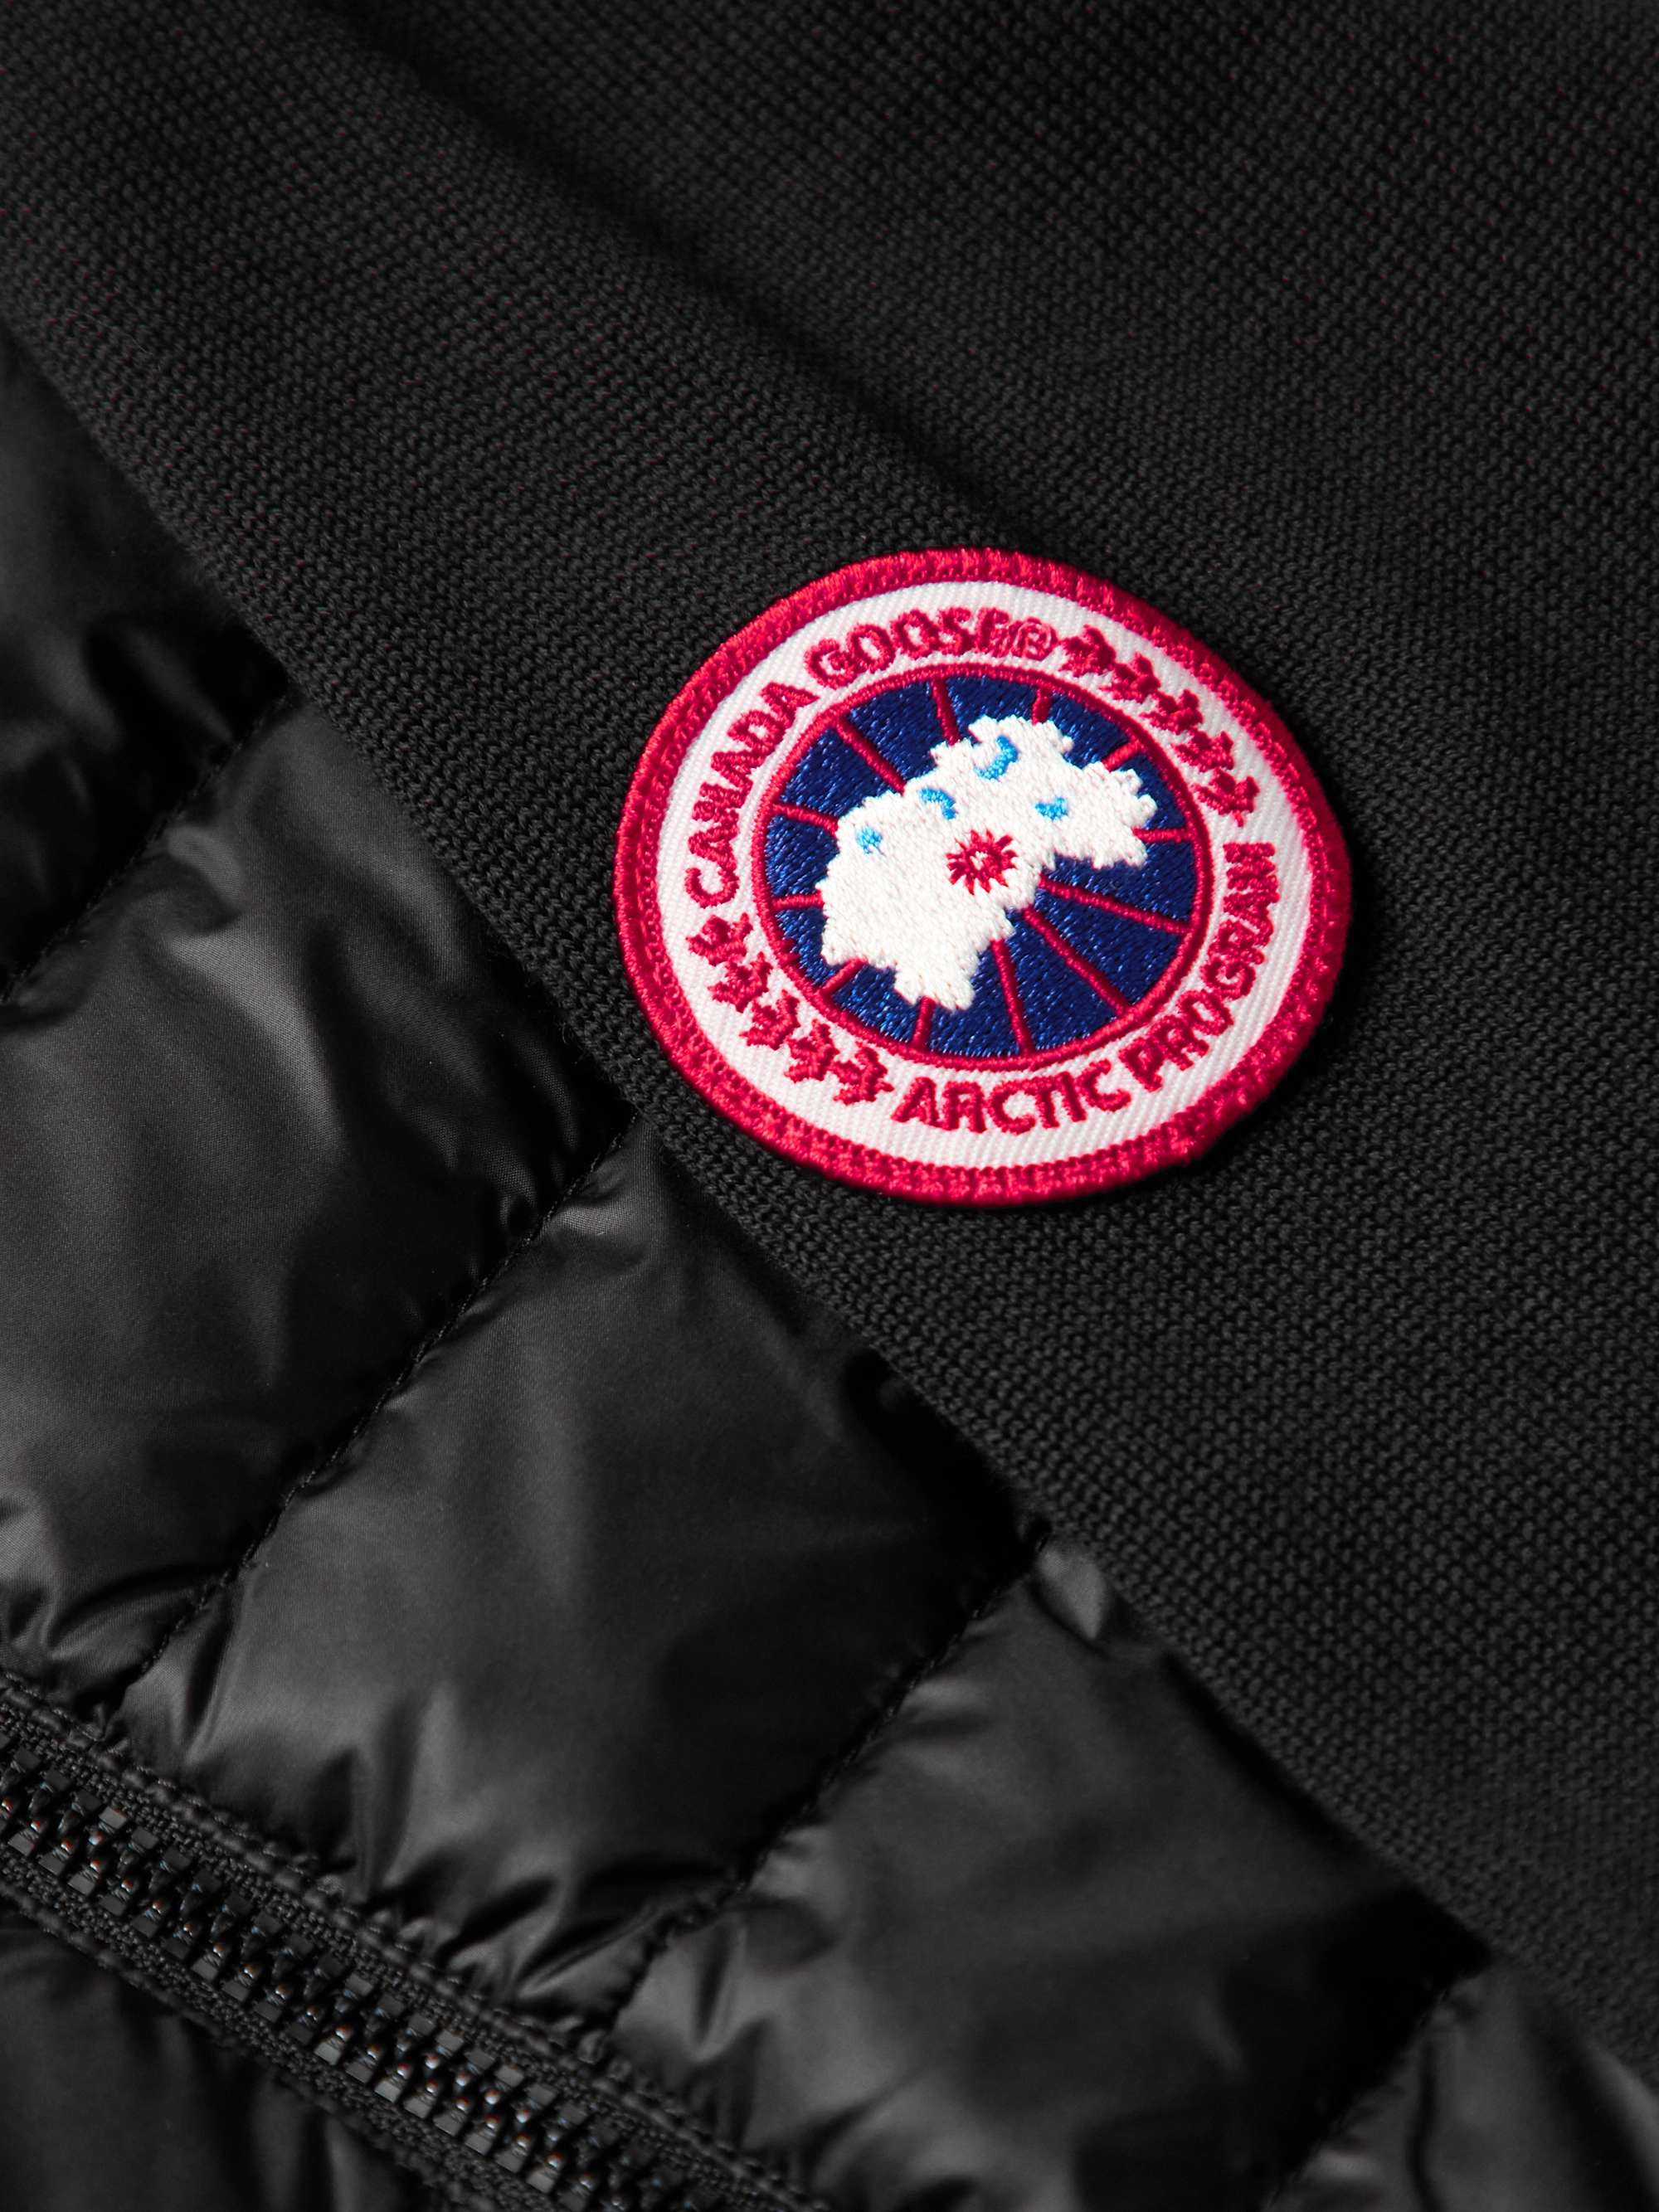 CANADA GOOSE HyBridge Slim-Fit Quilted Down Nylon and Wool Jacket